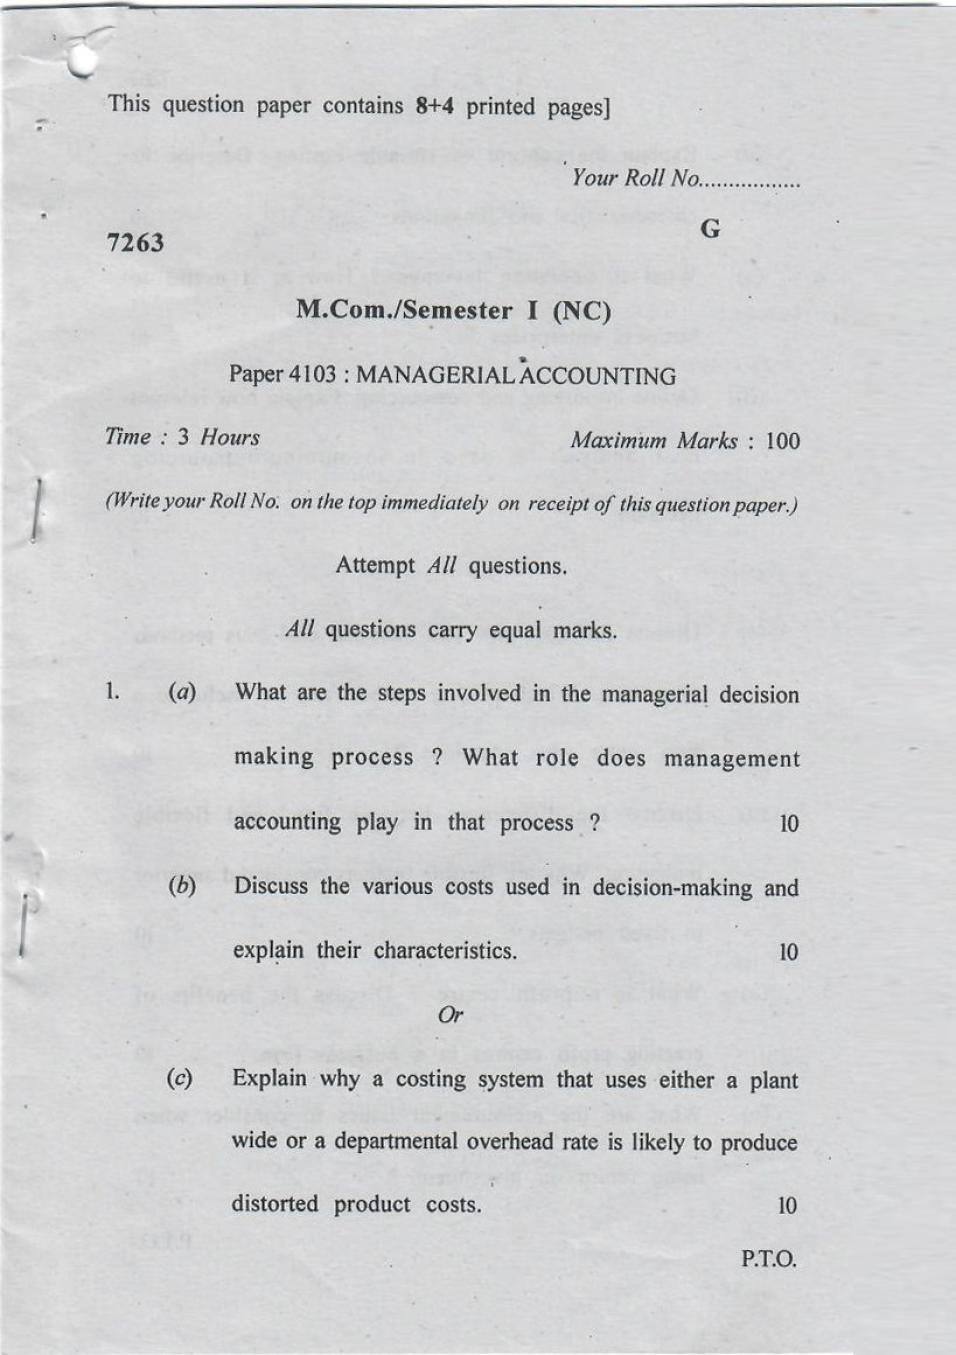 DU SOL M.Com Question Paper 1st Year 2017 Sem 1 Managerial Accounting - Page 1